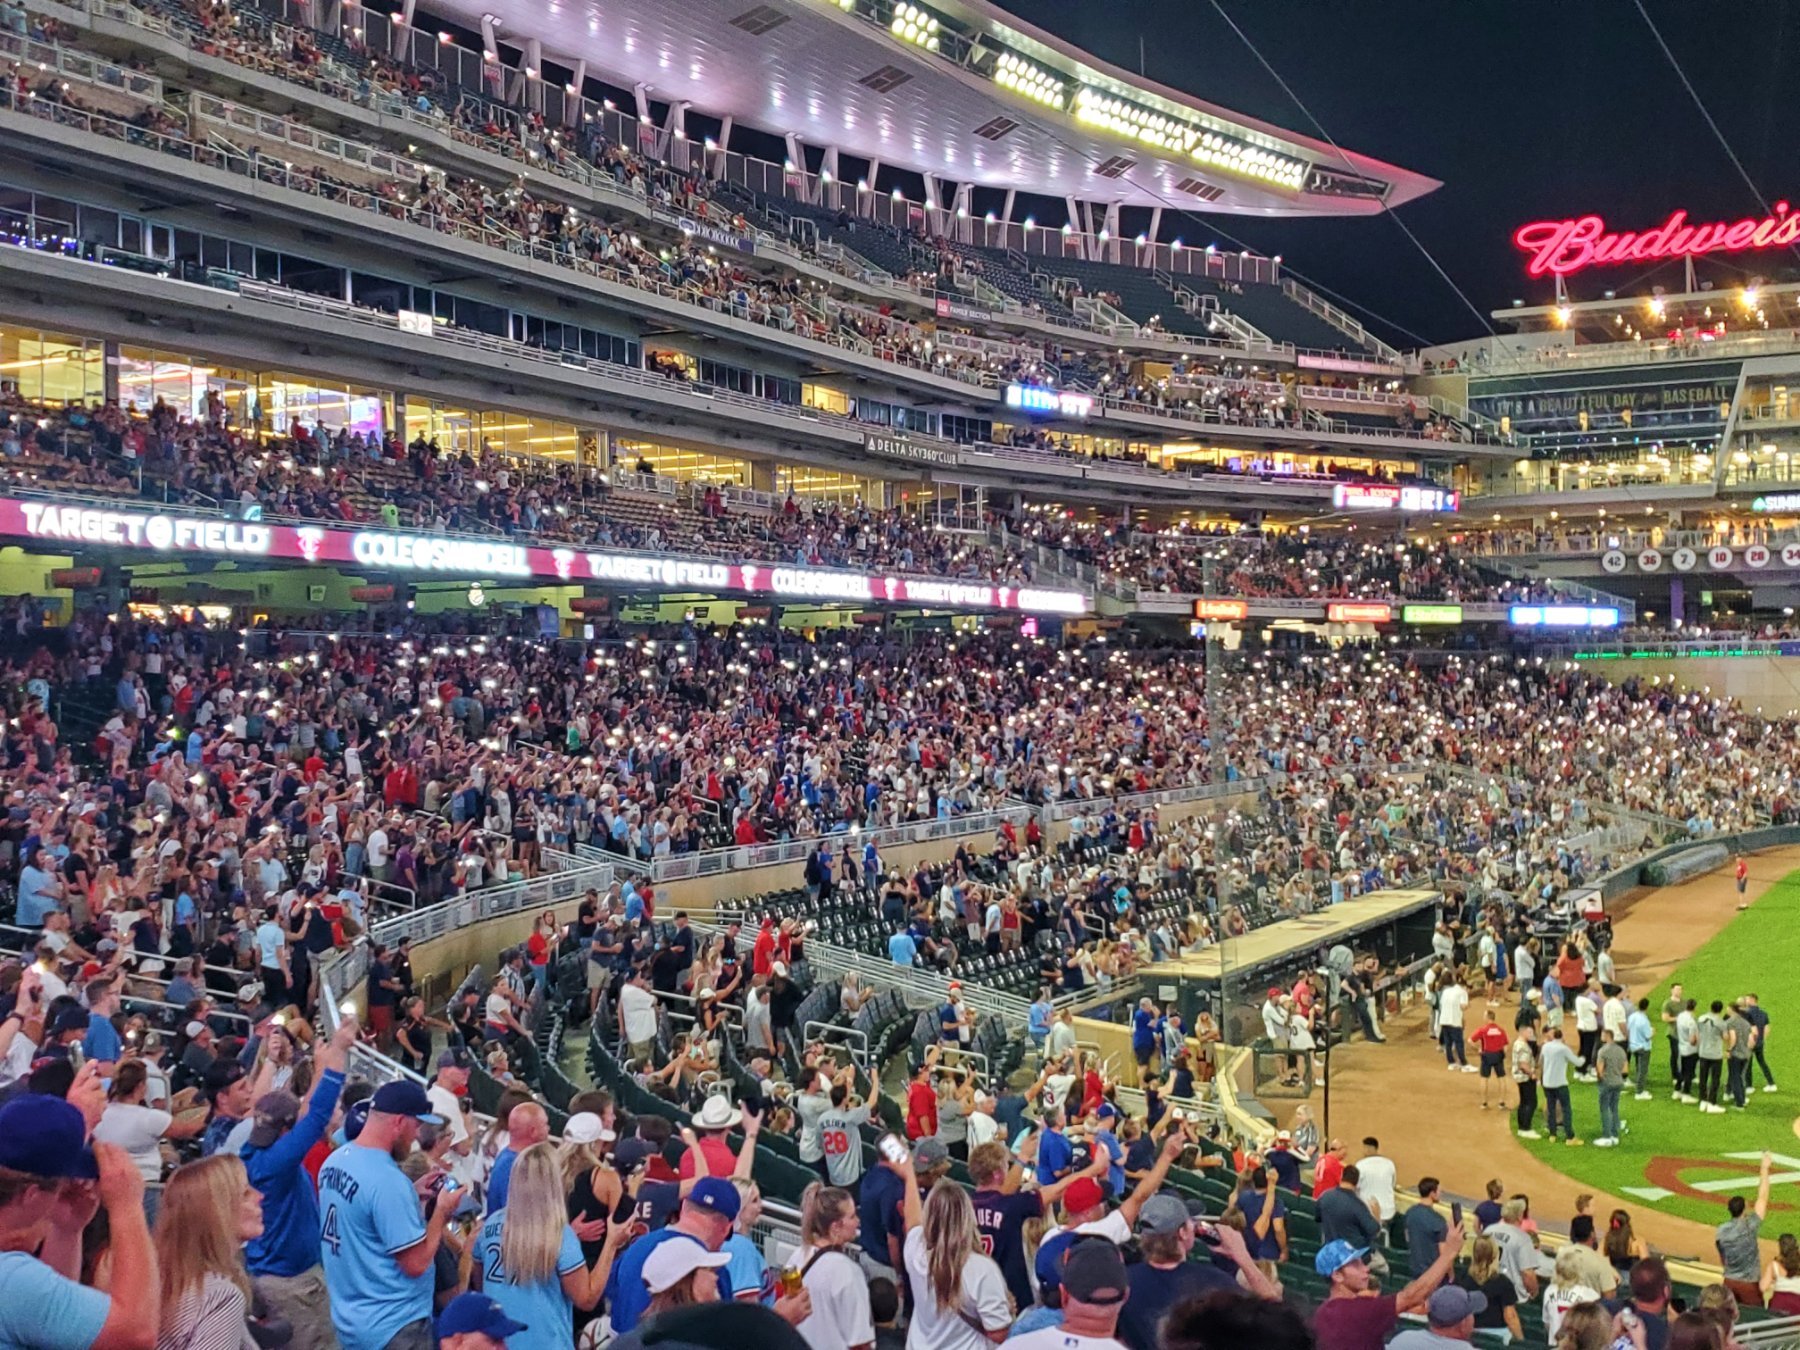 Minnesota Twins fans ride a wave of emotions on a do-or-die night at Target  Field